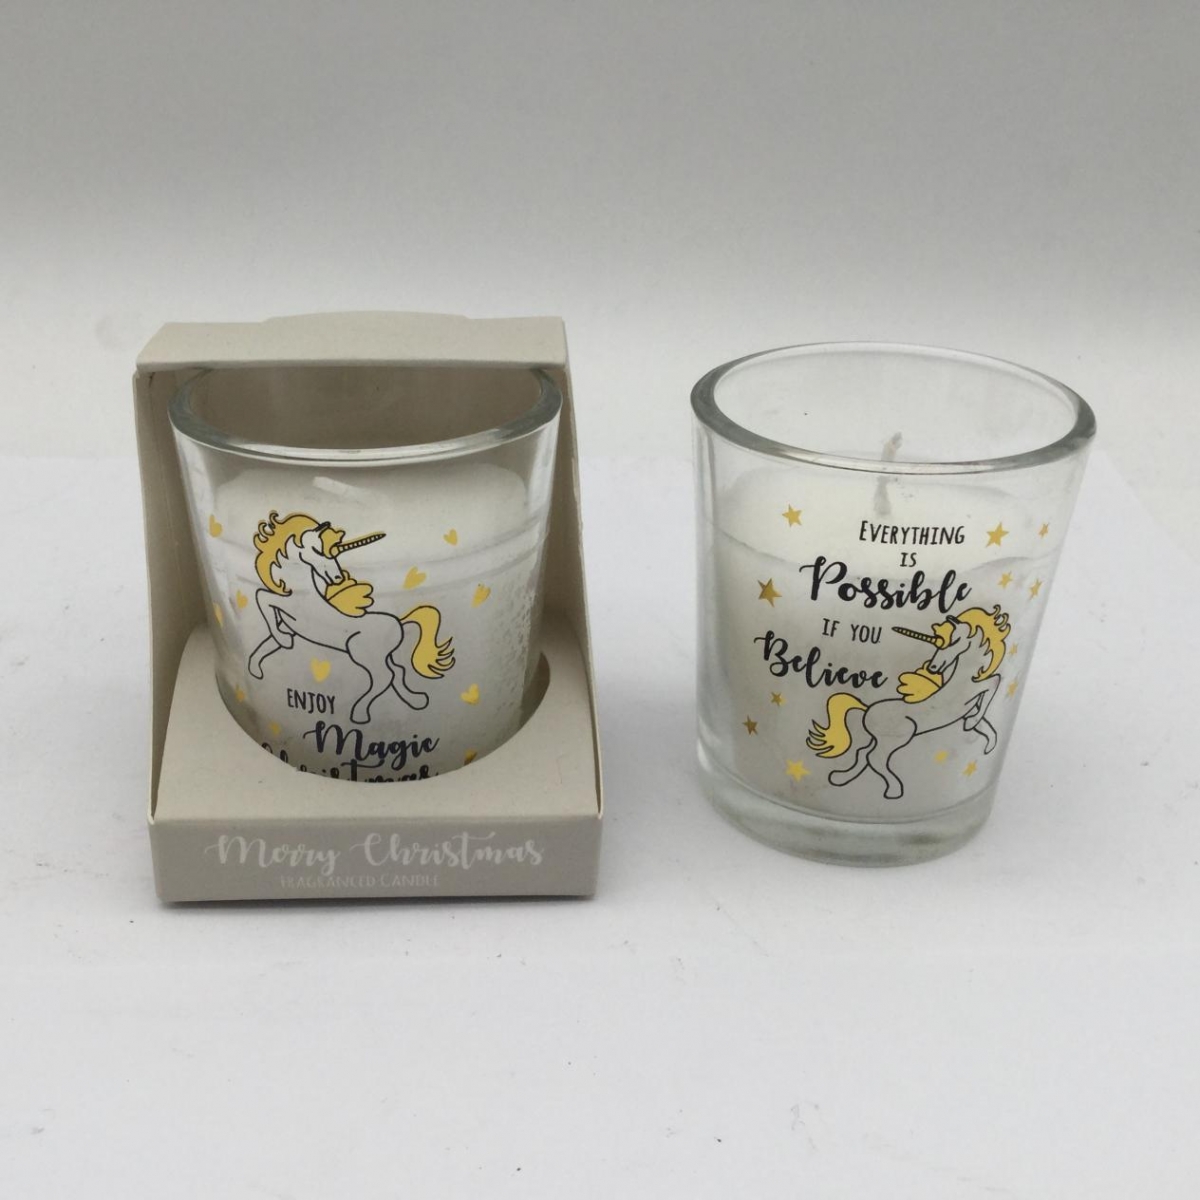 Vegan Candles：Custom Decal , Display Box , Scented Candles ,China Factory , Wholesale Price-HOWCANDLE-Candles,Scented Candles,Aromatherapy Candles,Soy Candles,Vegan Candles,Jar Candles,Pillar Candles,Candle Gift Sets,Essential Oils,Reed Diffuser,Candle Holder,